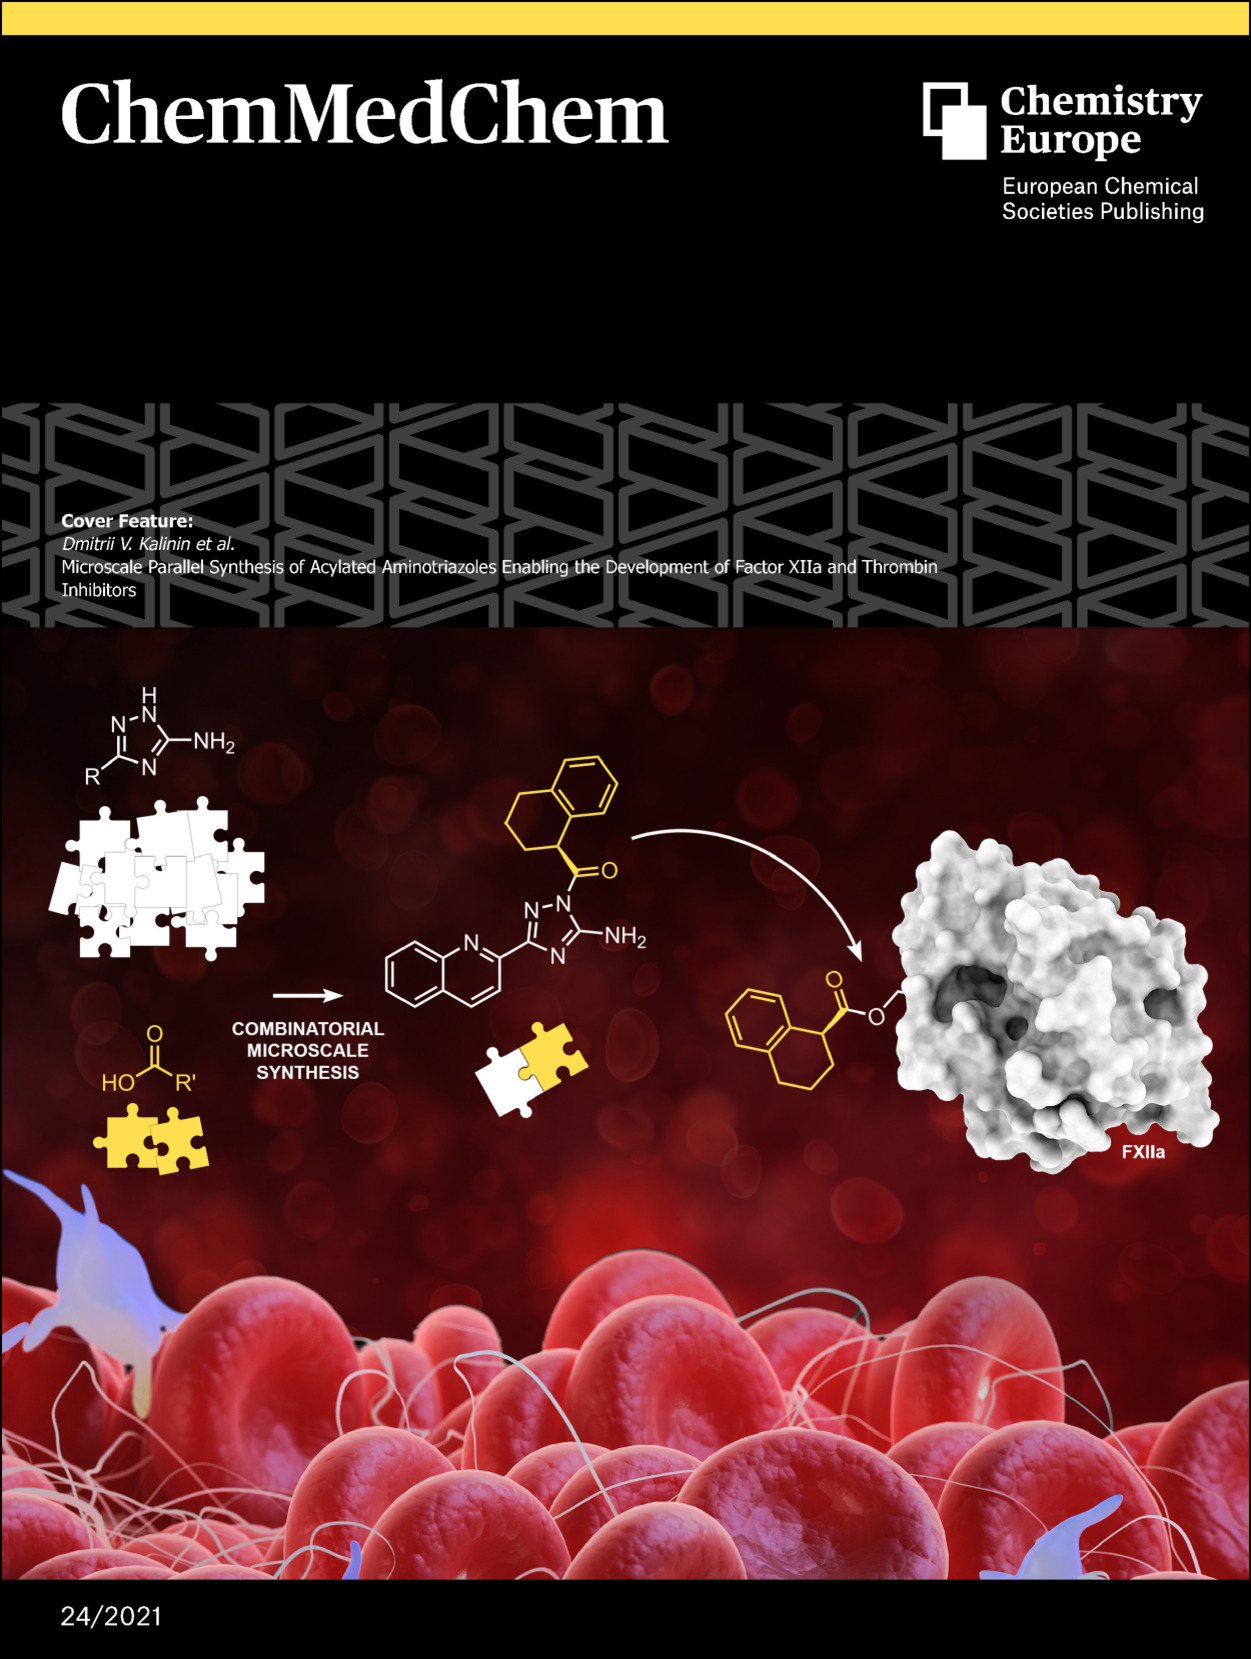 Cover Feature: Microscale Parallel Synthesis of Acylated Aminotriazoles Enabling the Development of Factor XIIa and Thrombin Inhibitors (ChemMedChem 24/2021)